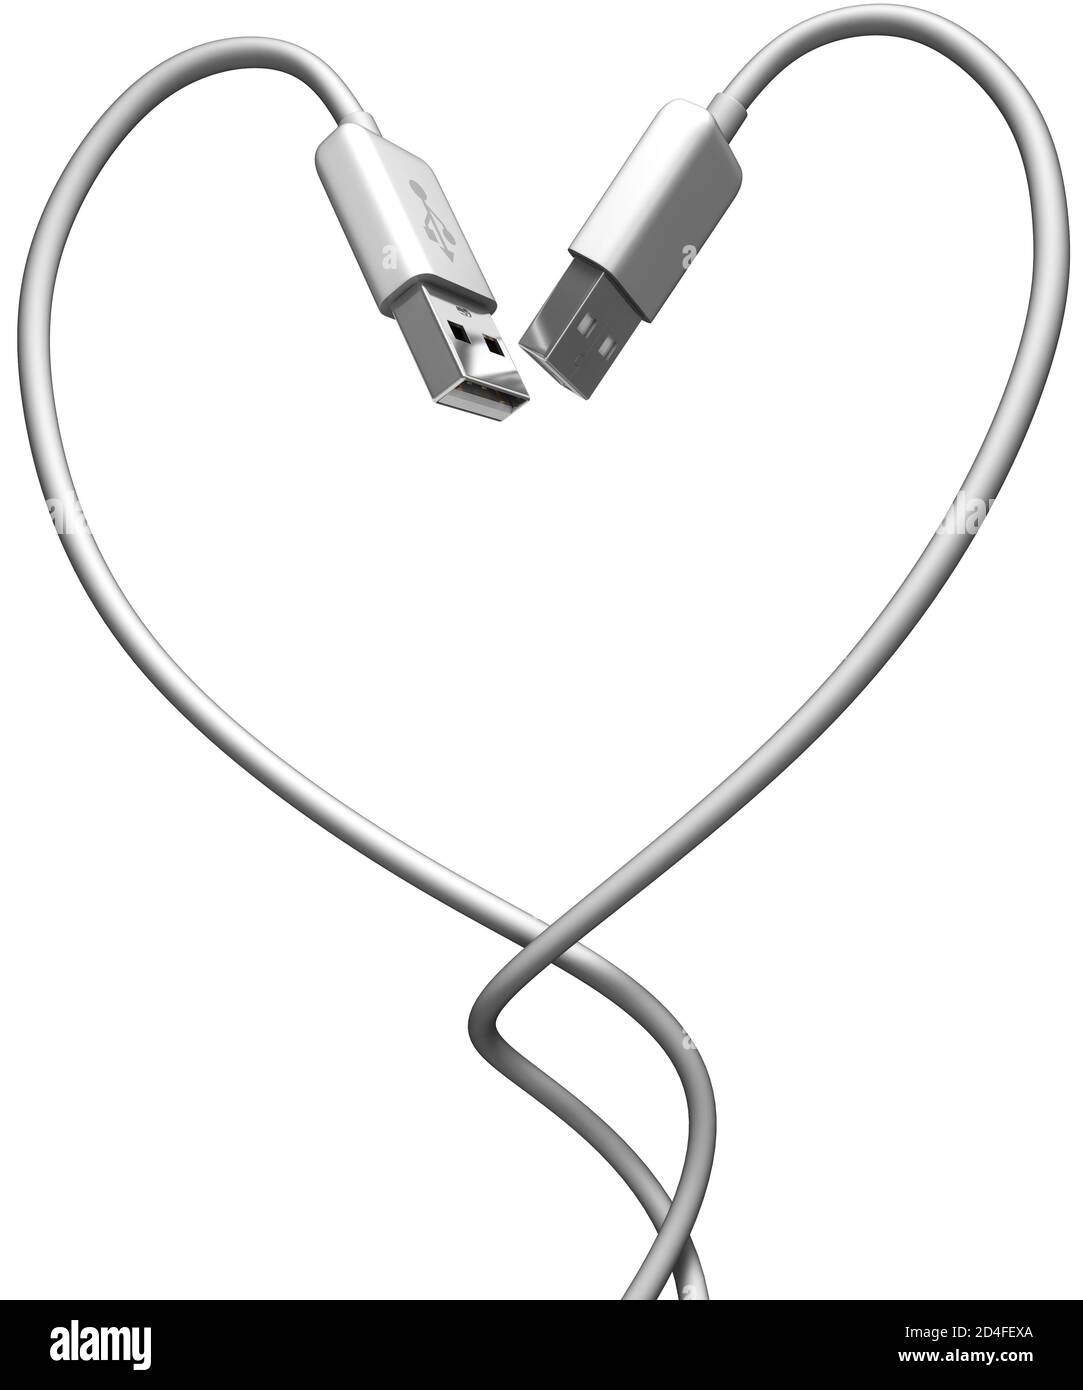 USB cables heart shape, connection, relationship, computer love Stock Photo